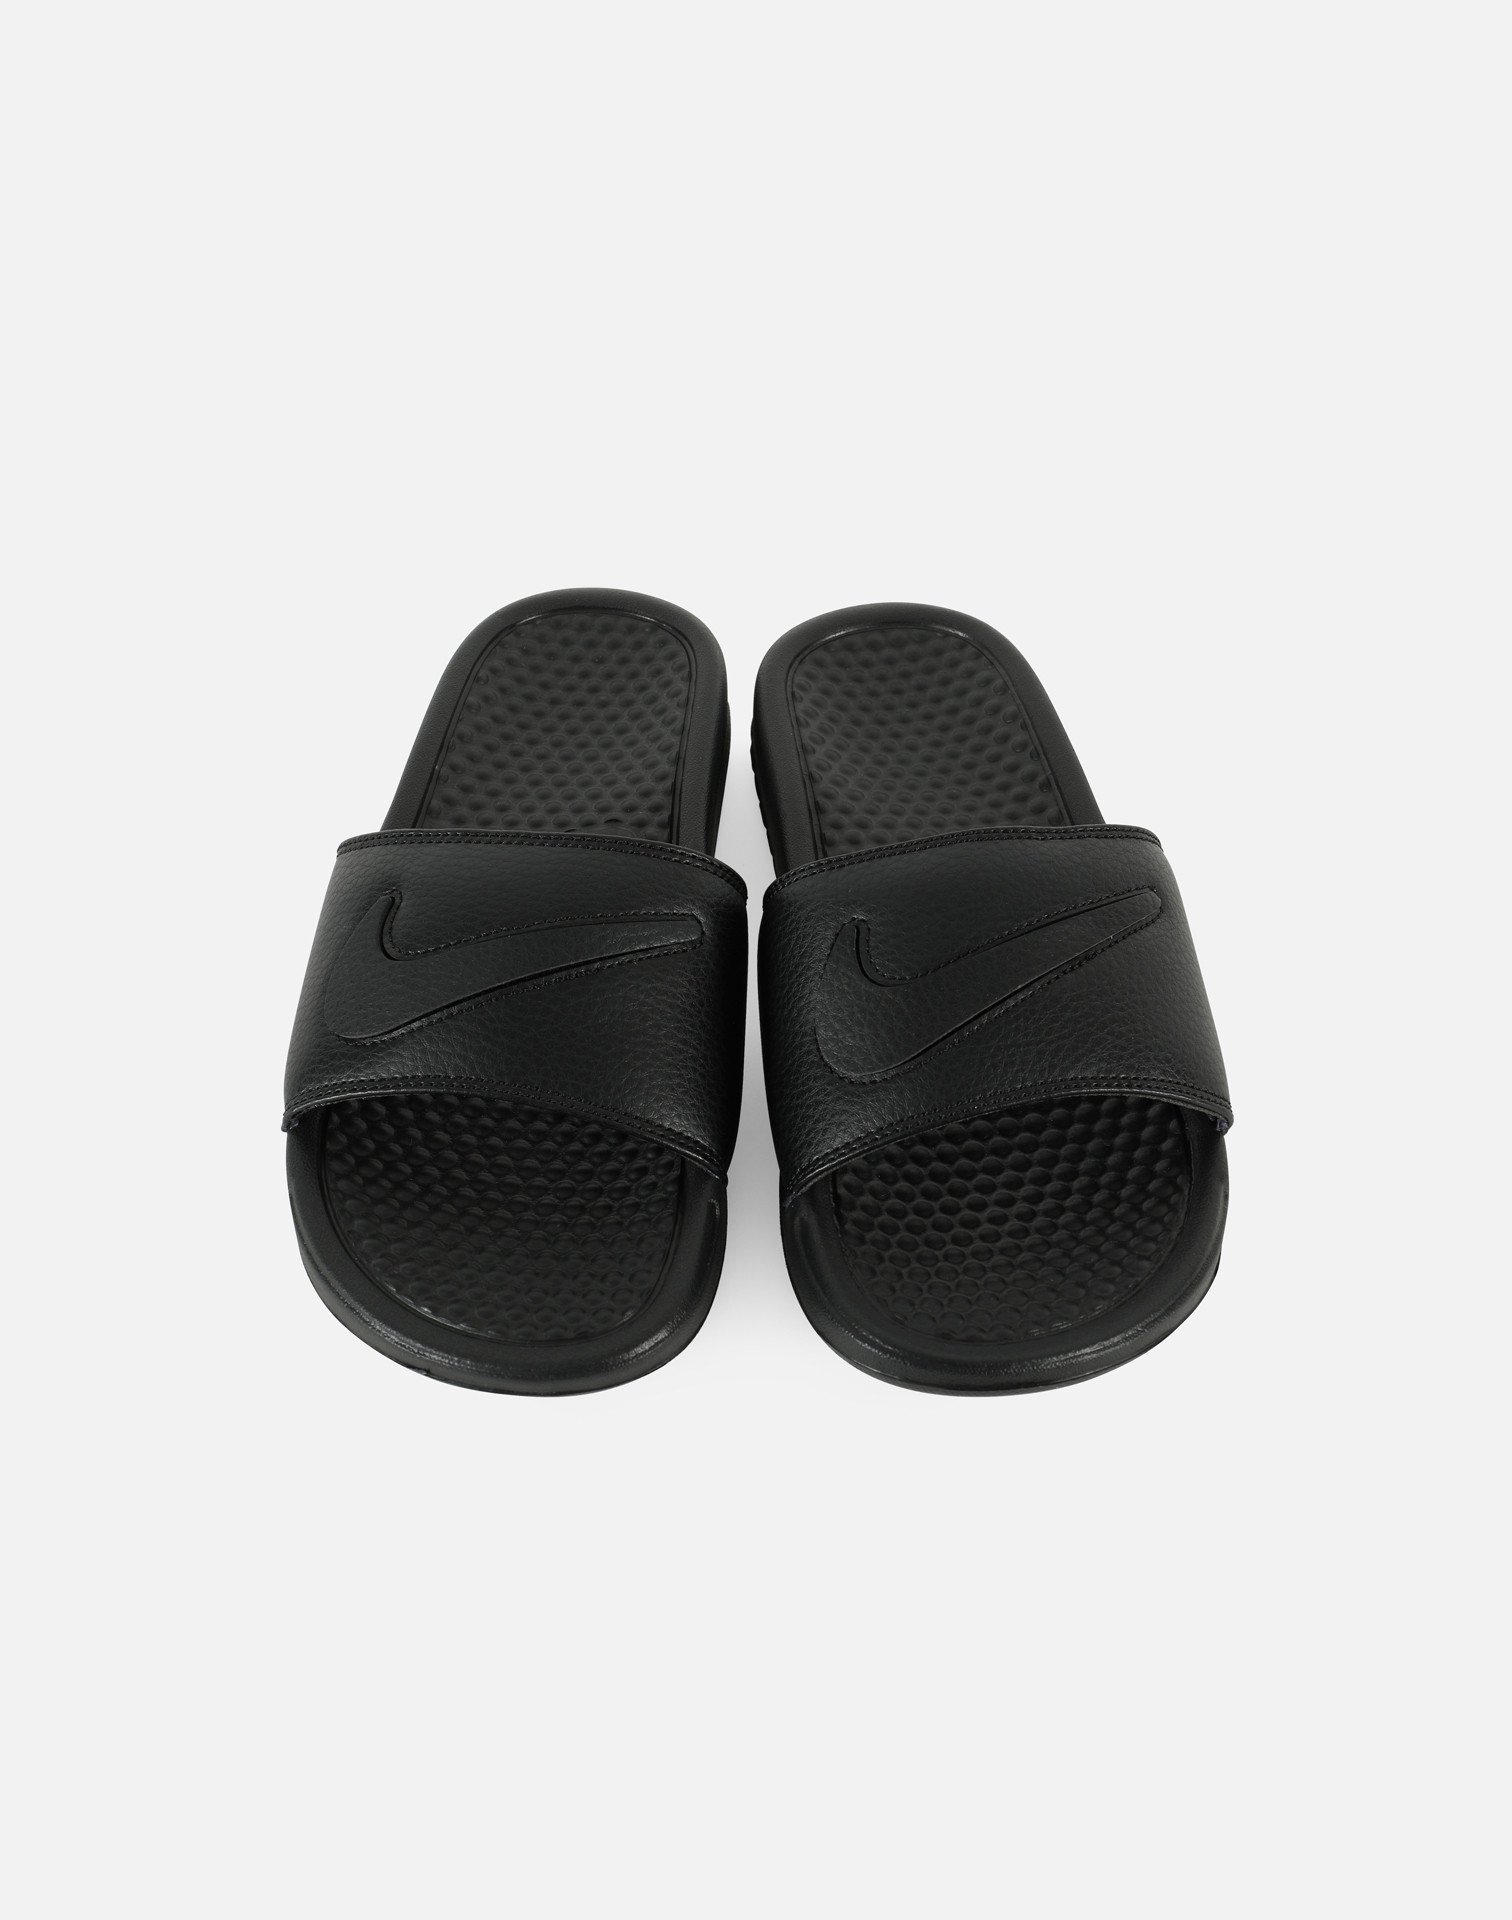 Positivo haz La playa DTLR on Twitter: "Swap colors all summer with the Nike Benassi Slides with interchangeable  Swoosh's! (Swoosh Pack) for only $39.96! Grab your pair here:  https://t.co/rlahamqL6W https://t.co/aseU7hLmYq" / Twitter